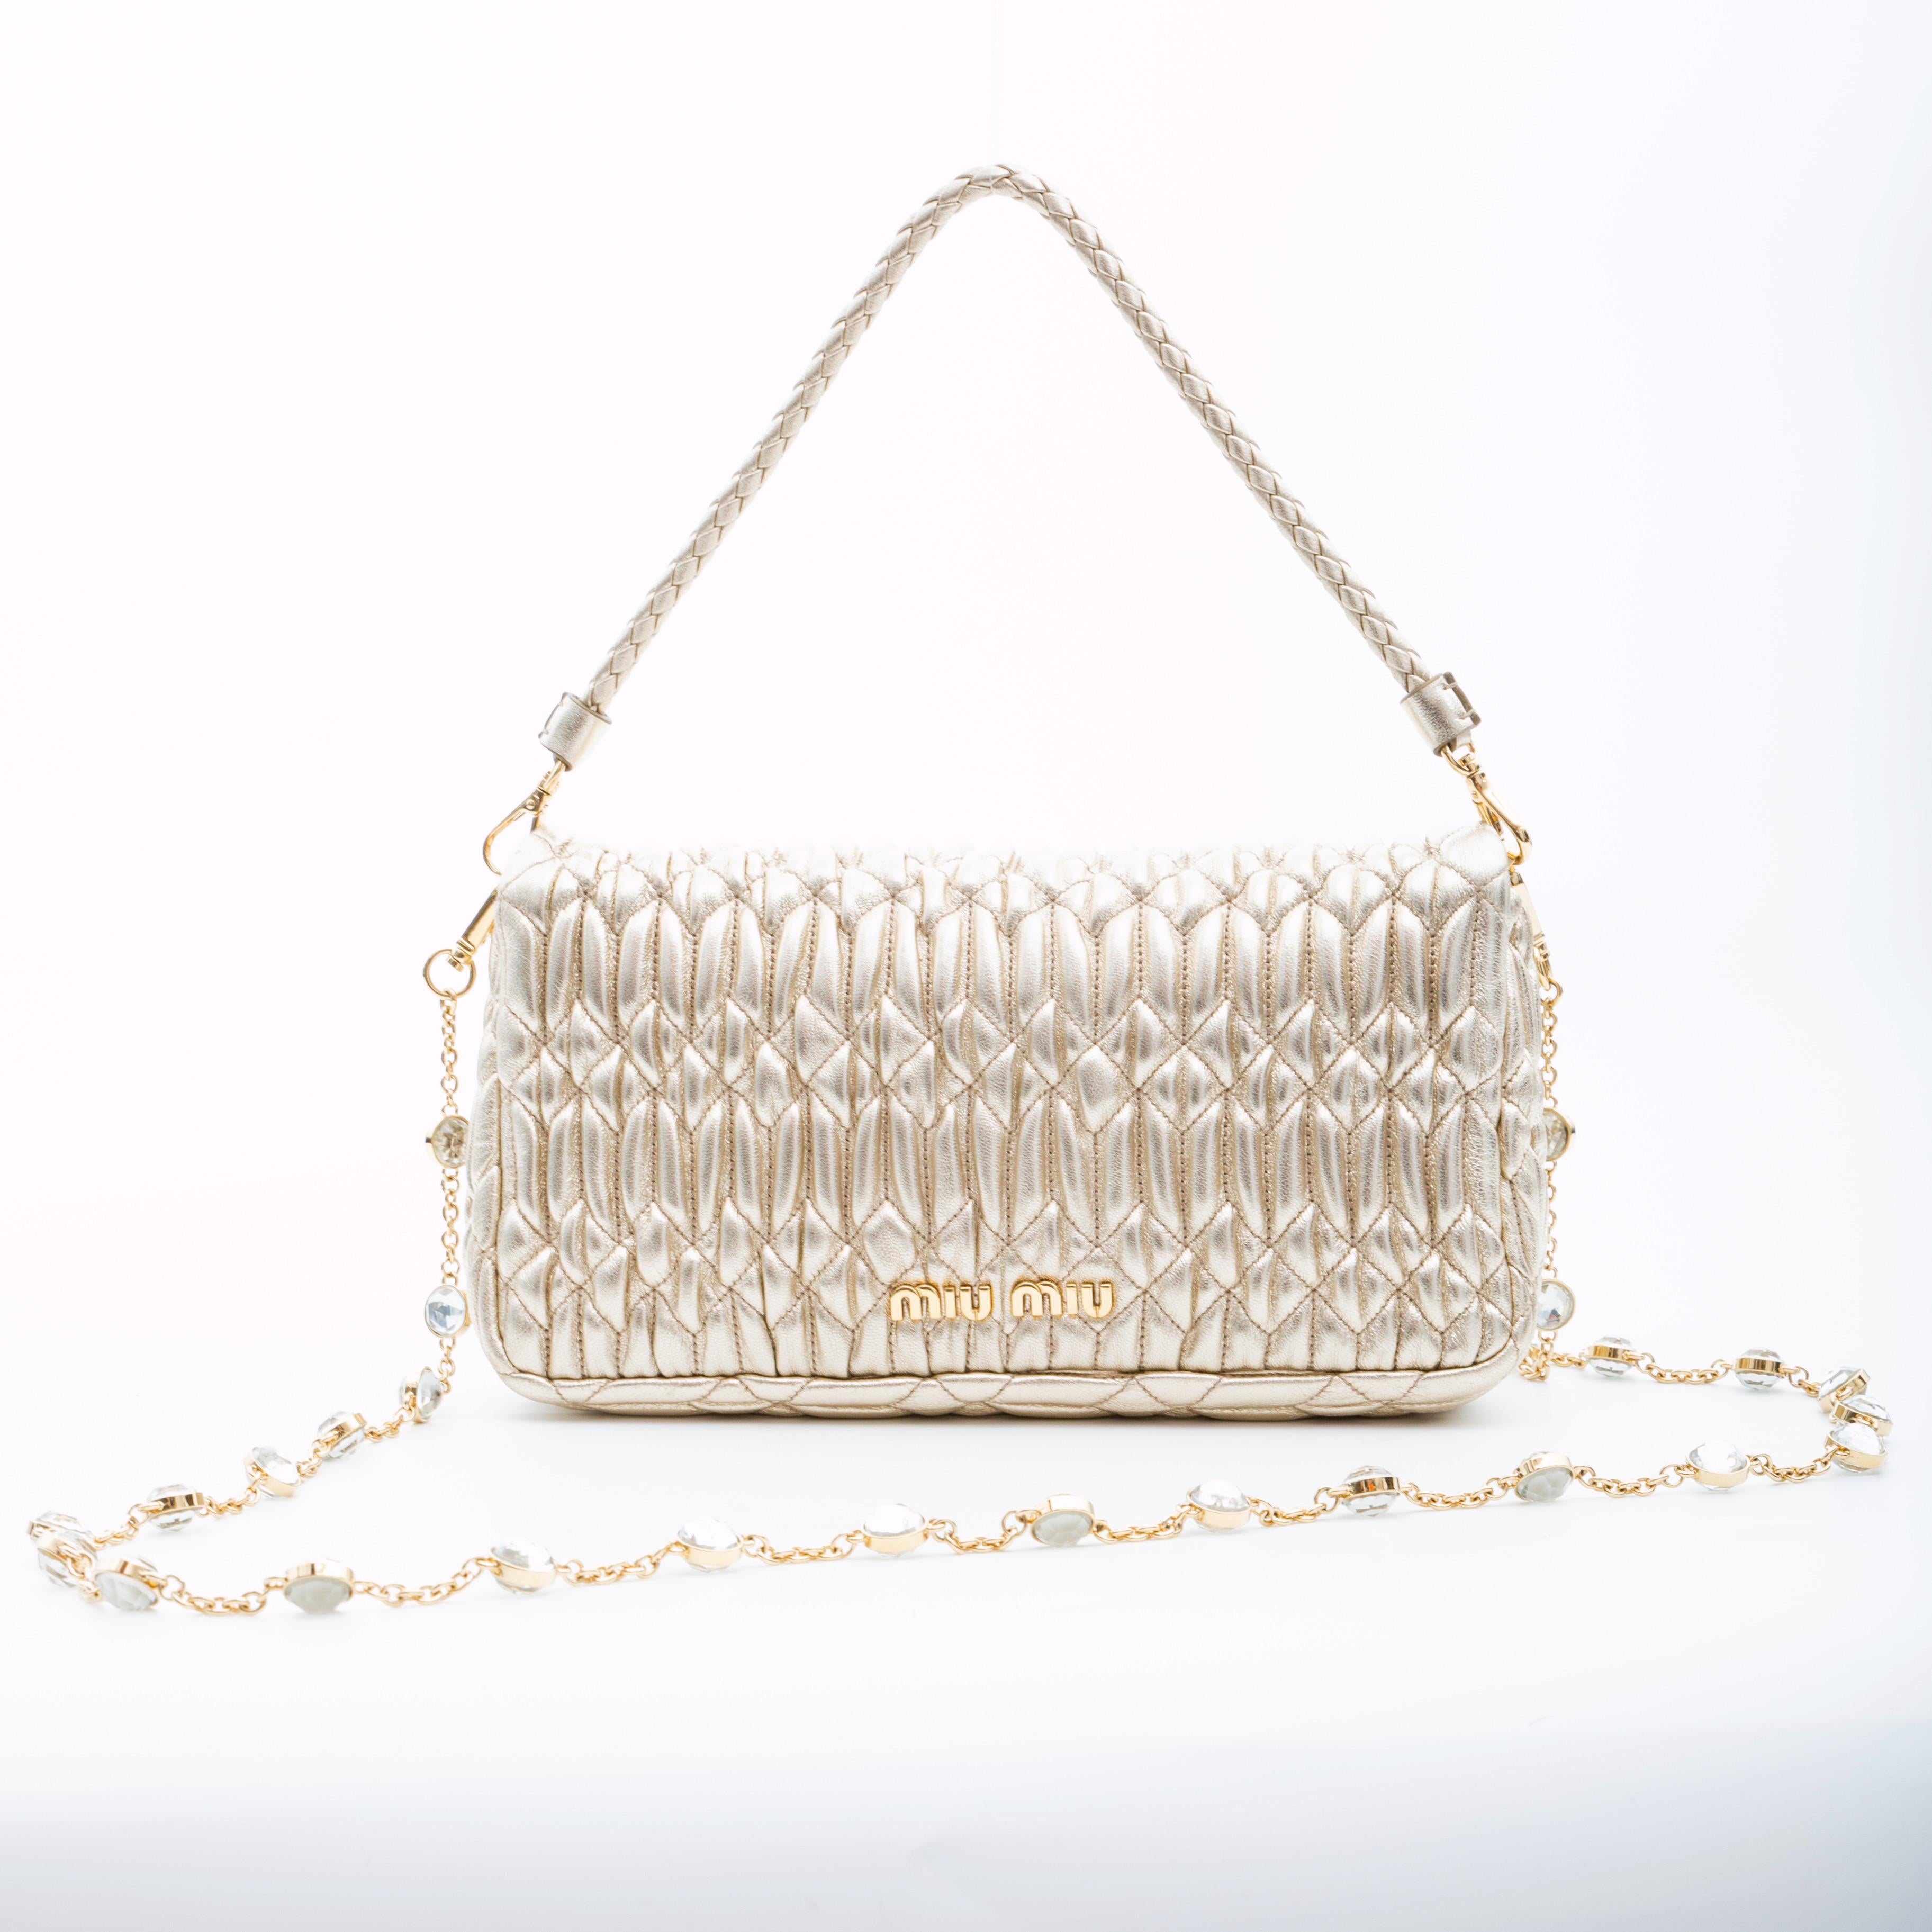 This feminine classic Miu Miu bag is made from the fashion house's signature texture cut from nappa leather with cloquet craftsmanship. The bag features two removable straps including one gold chain shoulder strap with synthetic crystal